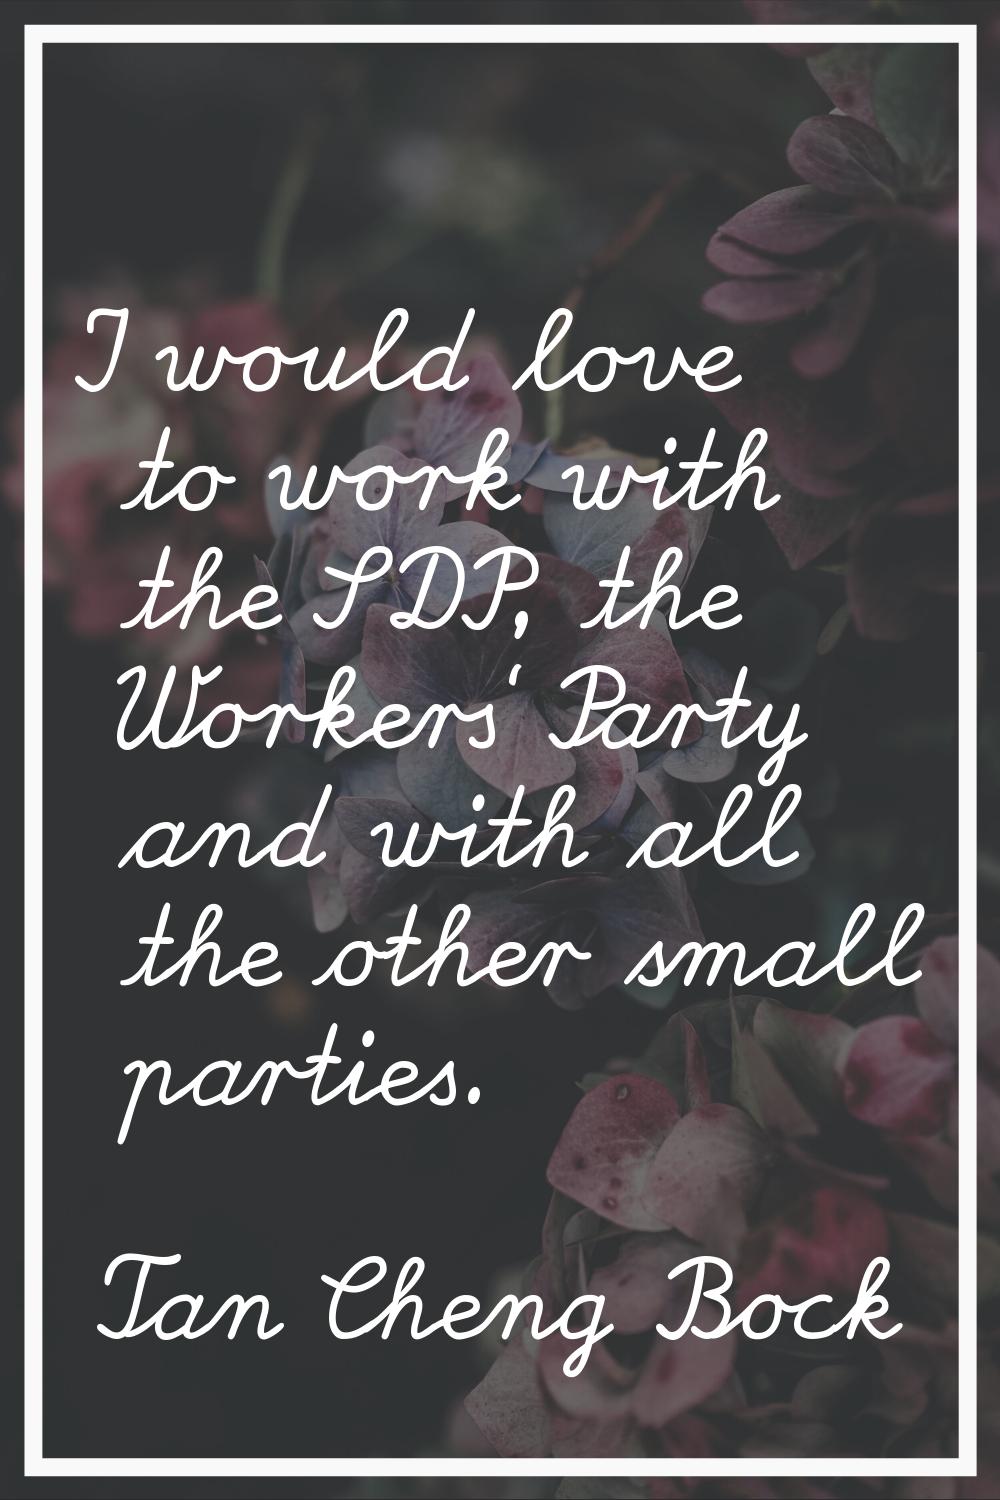 I would love to work with the SDP, the Workers' Party and with all the other small parties.